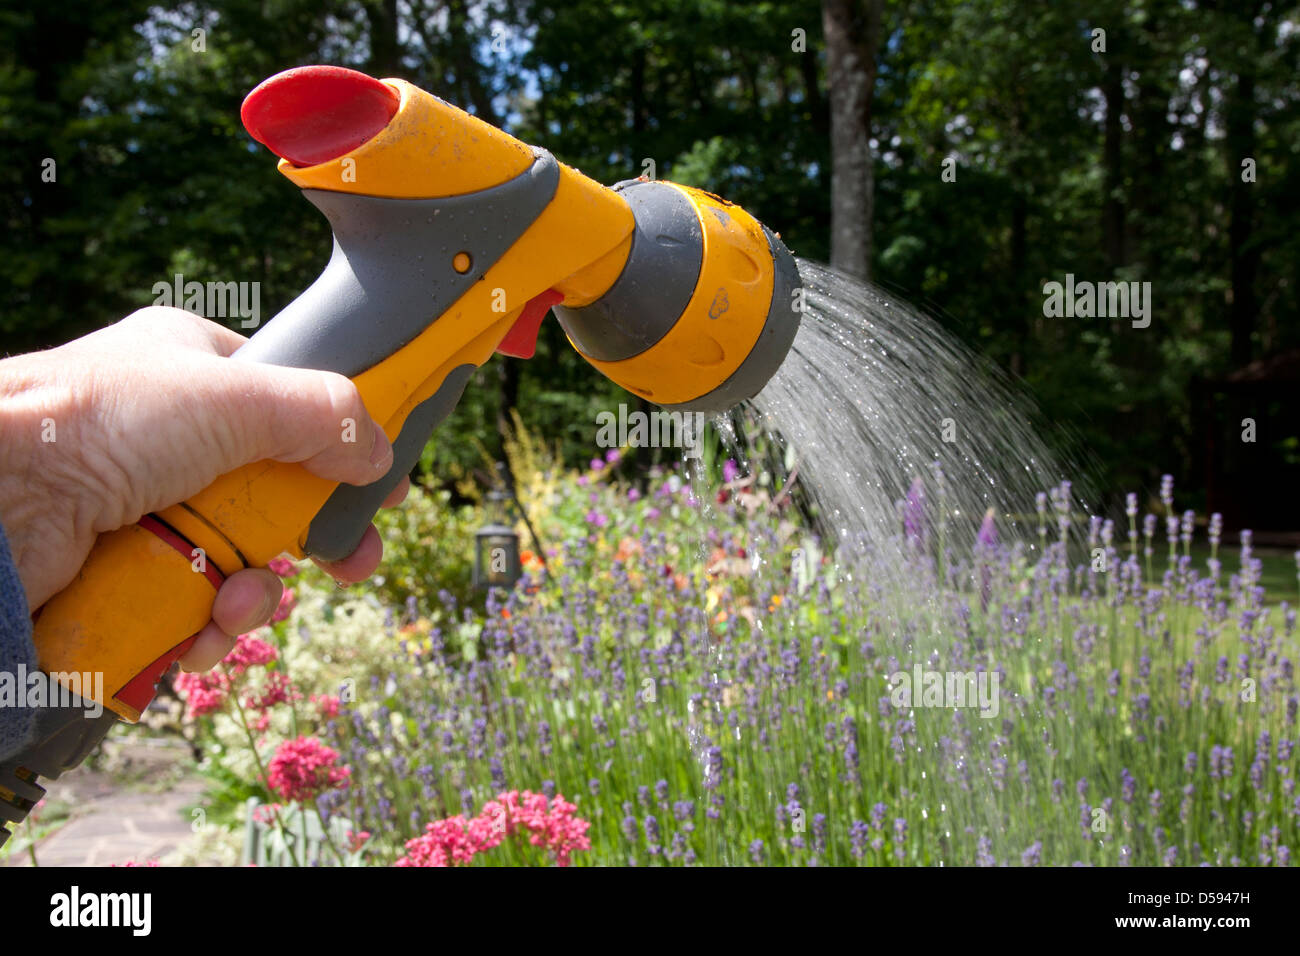 person watering flowers with hosepipe Stock Photo